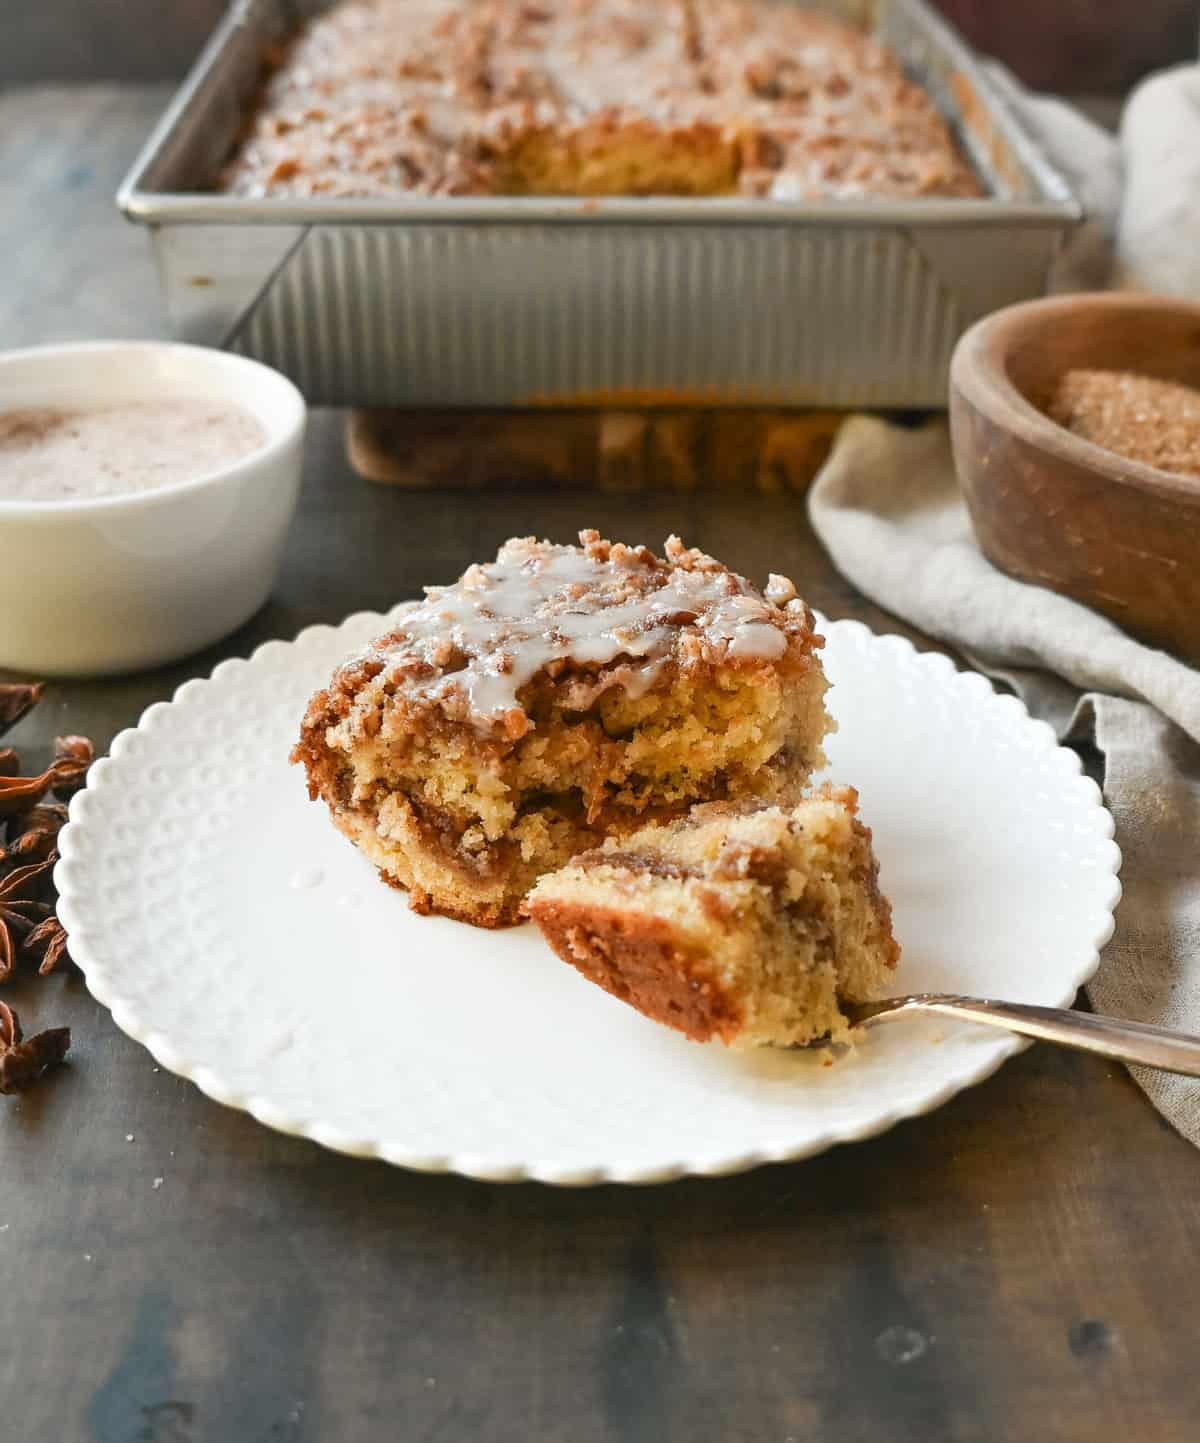 Best Coffee Cake Recipe. This cinnamon brown sugar sour cream coffee cake is made with a buttery cake layered with a brown sugar cinnamon layer and topped with a streusel topping and a sweet glaze. The best coffee cake recipe perfect for breakfast or brunch.